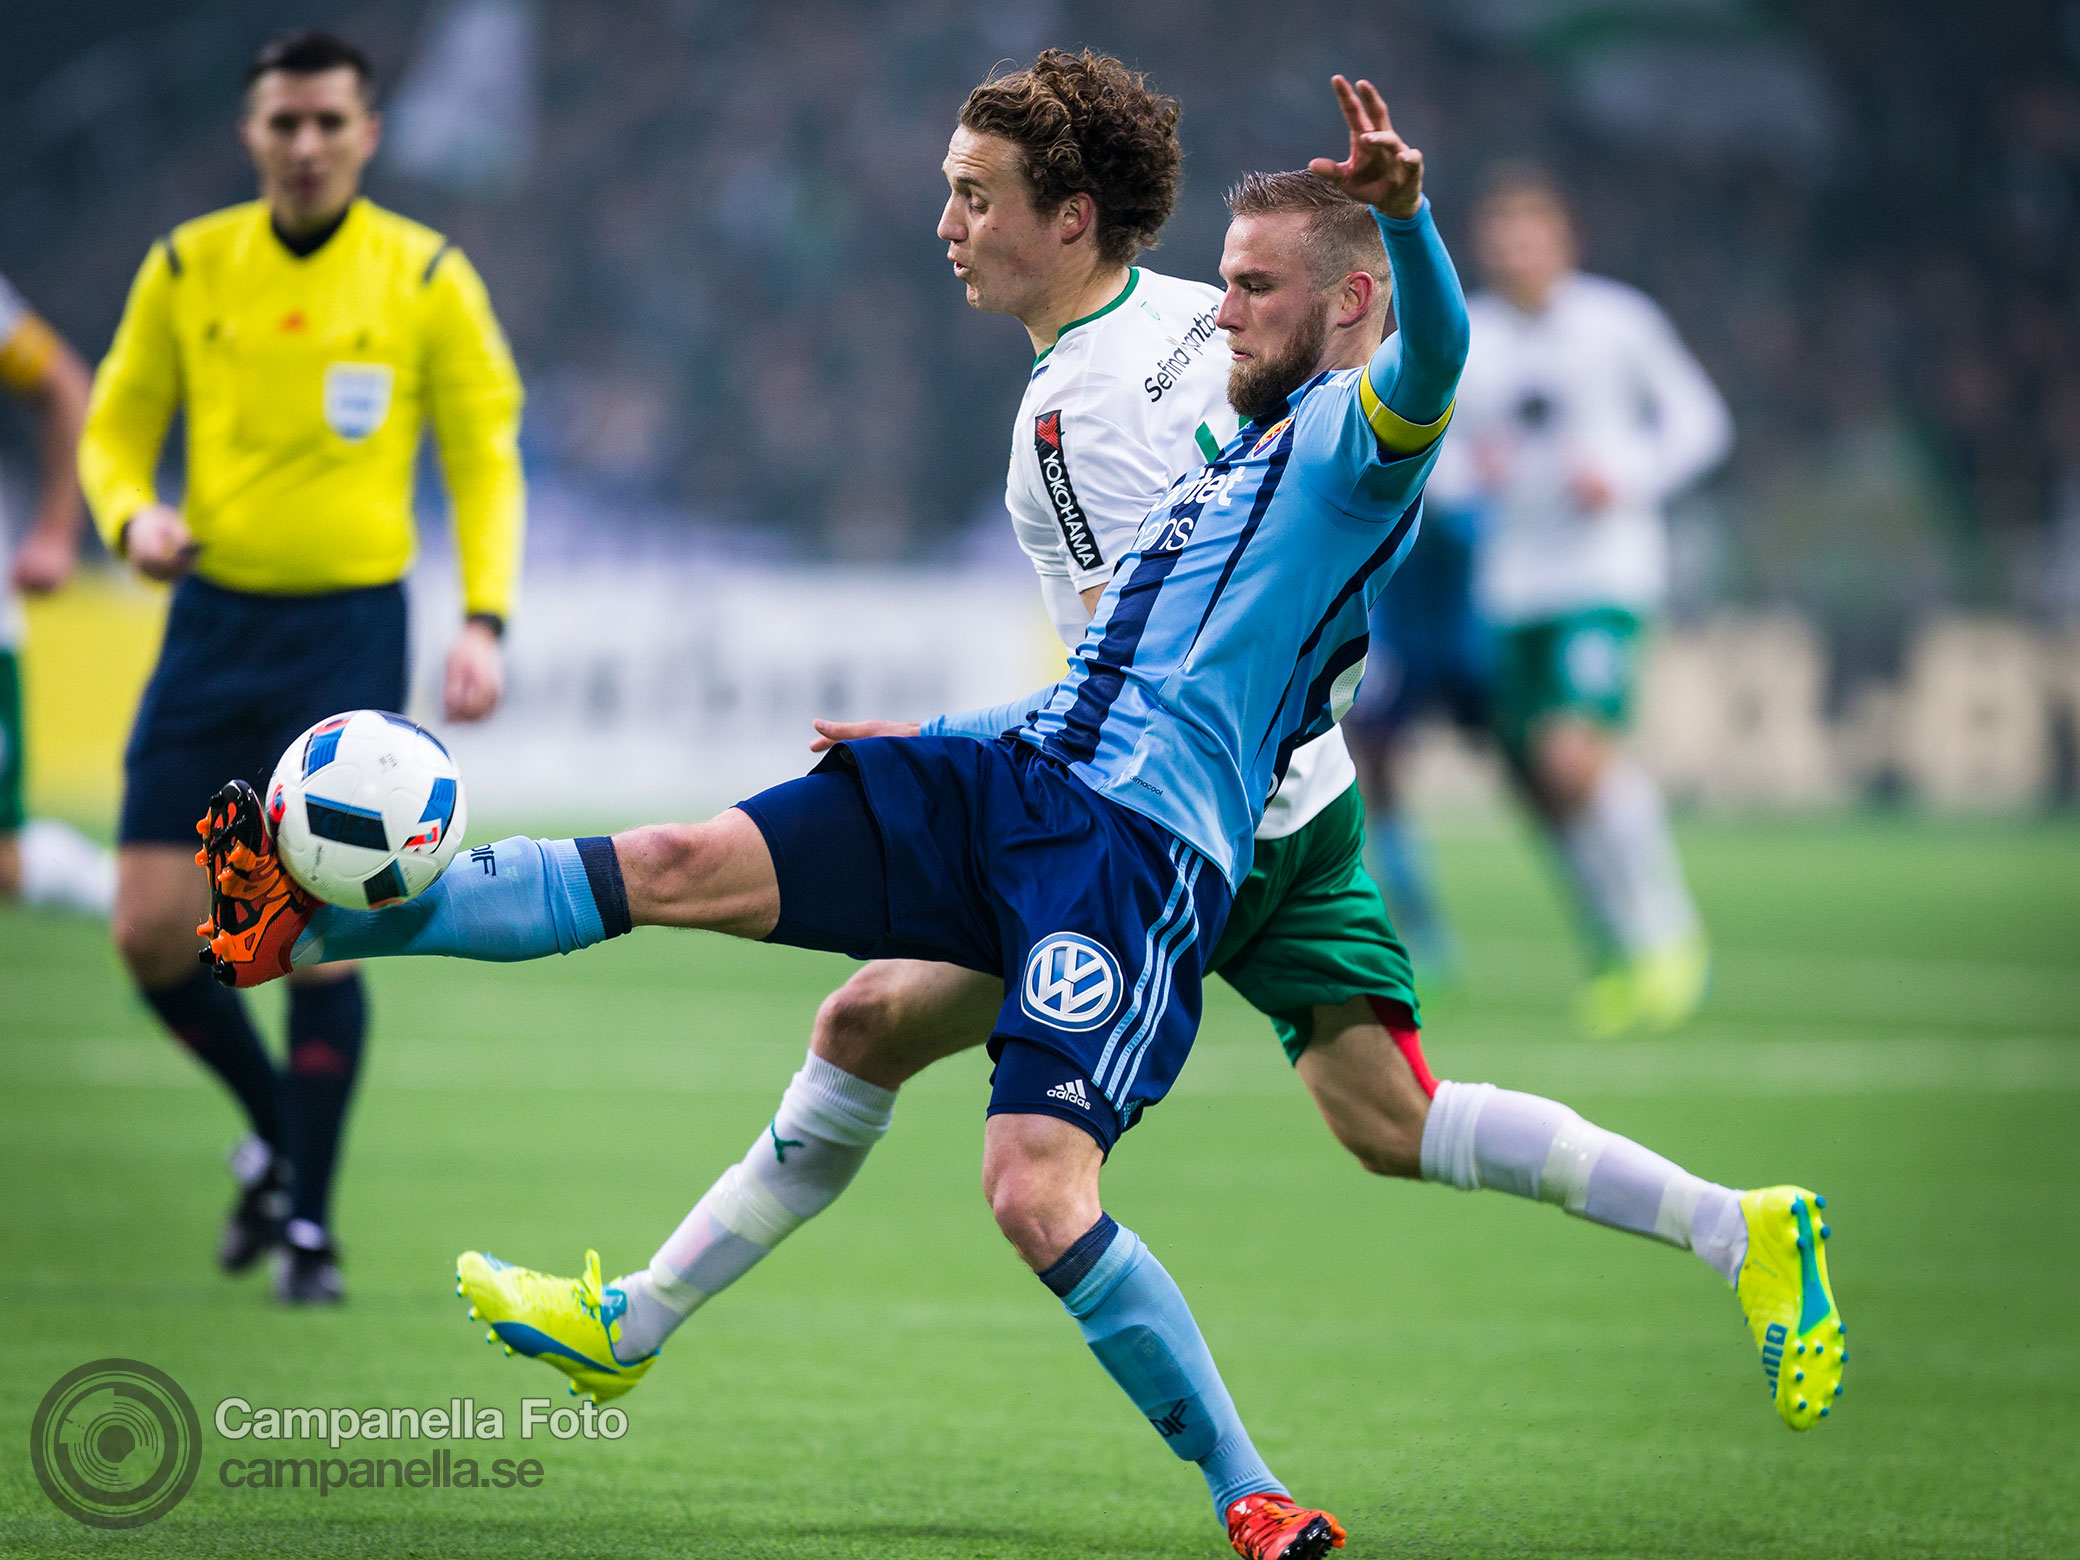 Hammarby takes Swedish Cup Derby - Sports photography Michael Campanella